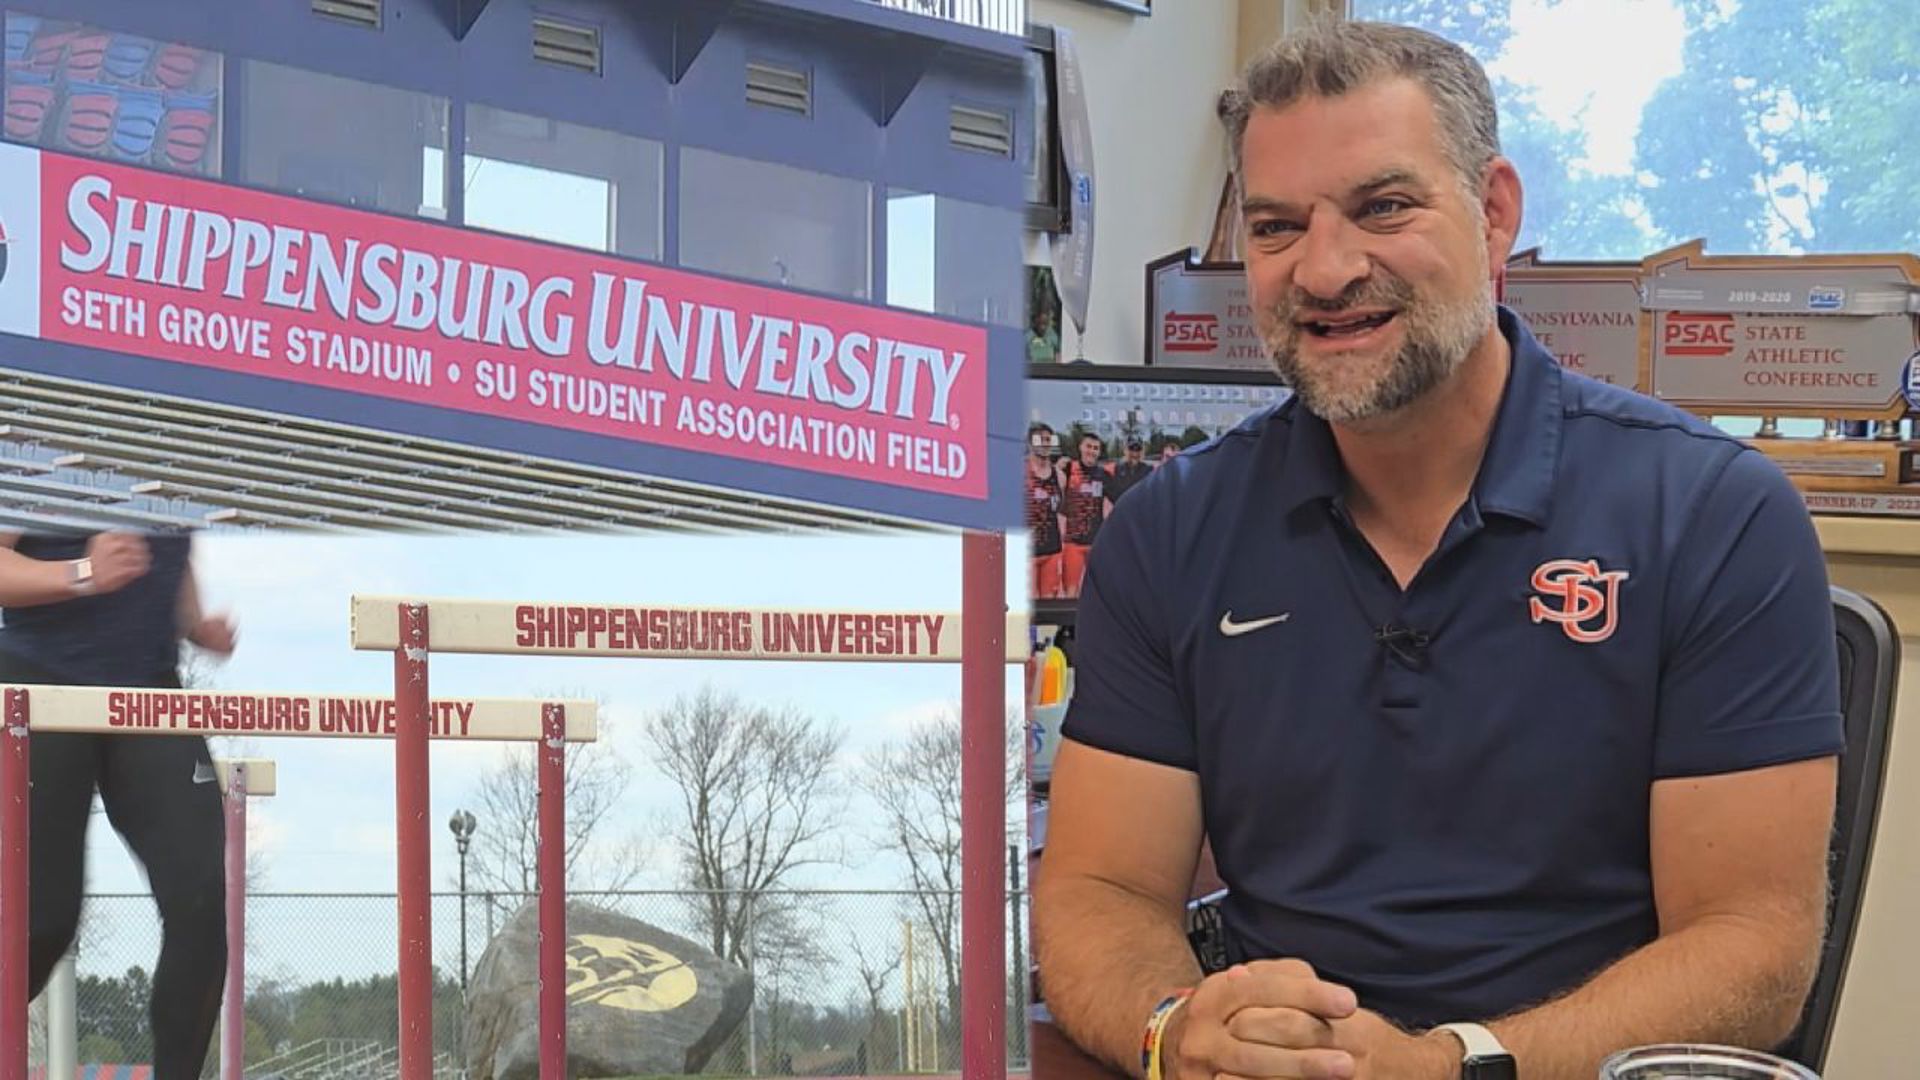 Coach Osanitsch talks about the impact of his assistant coaches, what drew him to Shippensburg as a student-athlete, and what he looks for in recruits.